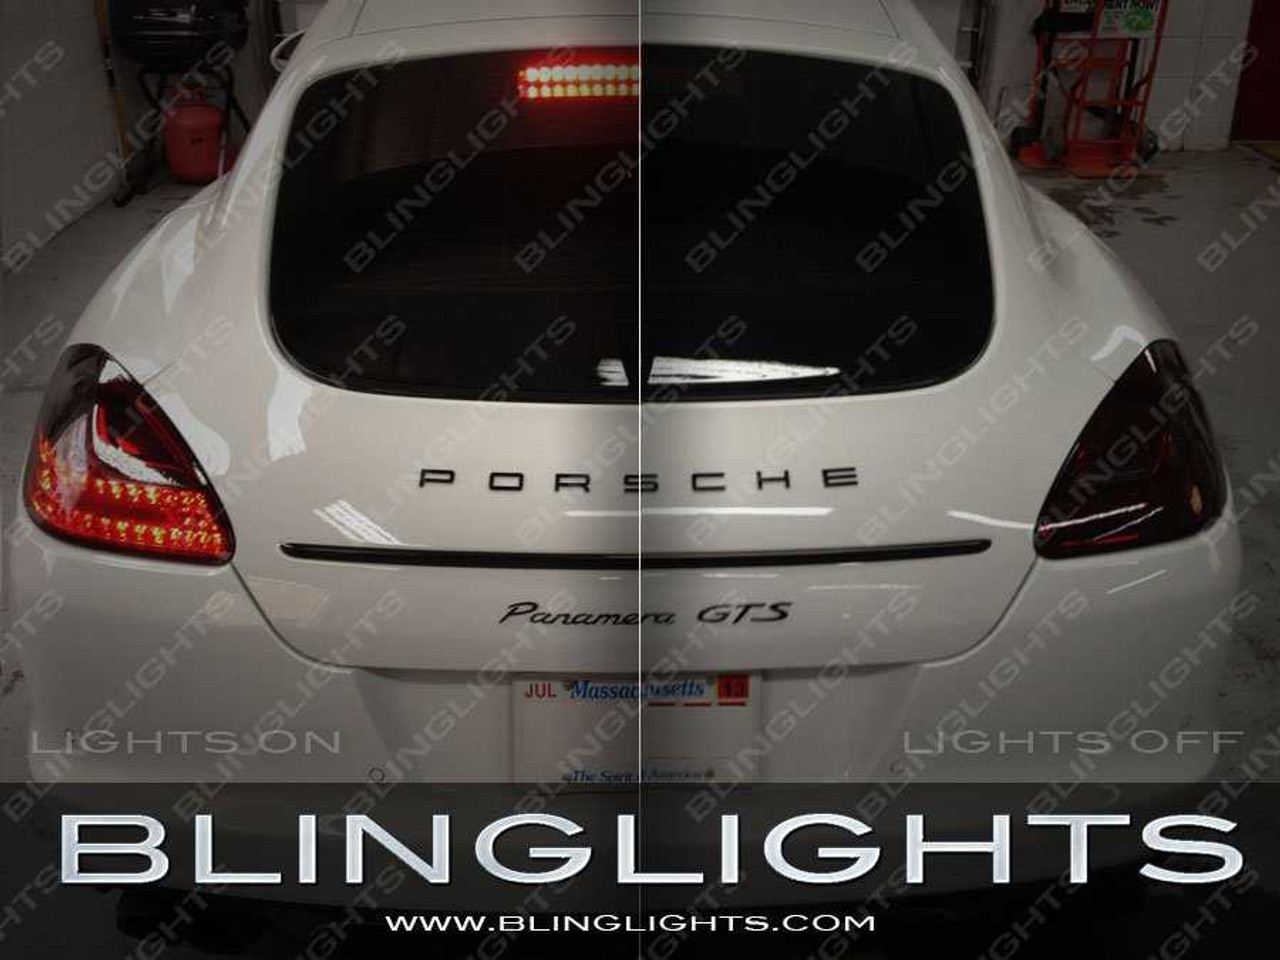 BlingLights Brand Tinted Taillight Film Covers for 1990-1999 Toyota MR2